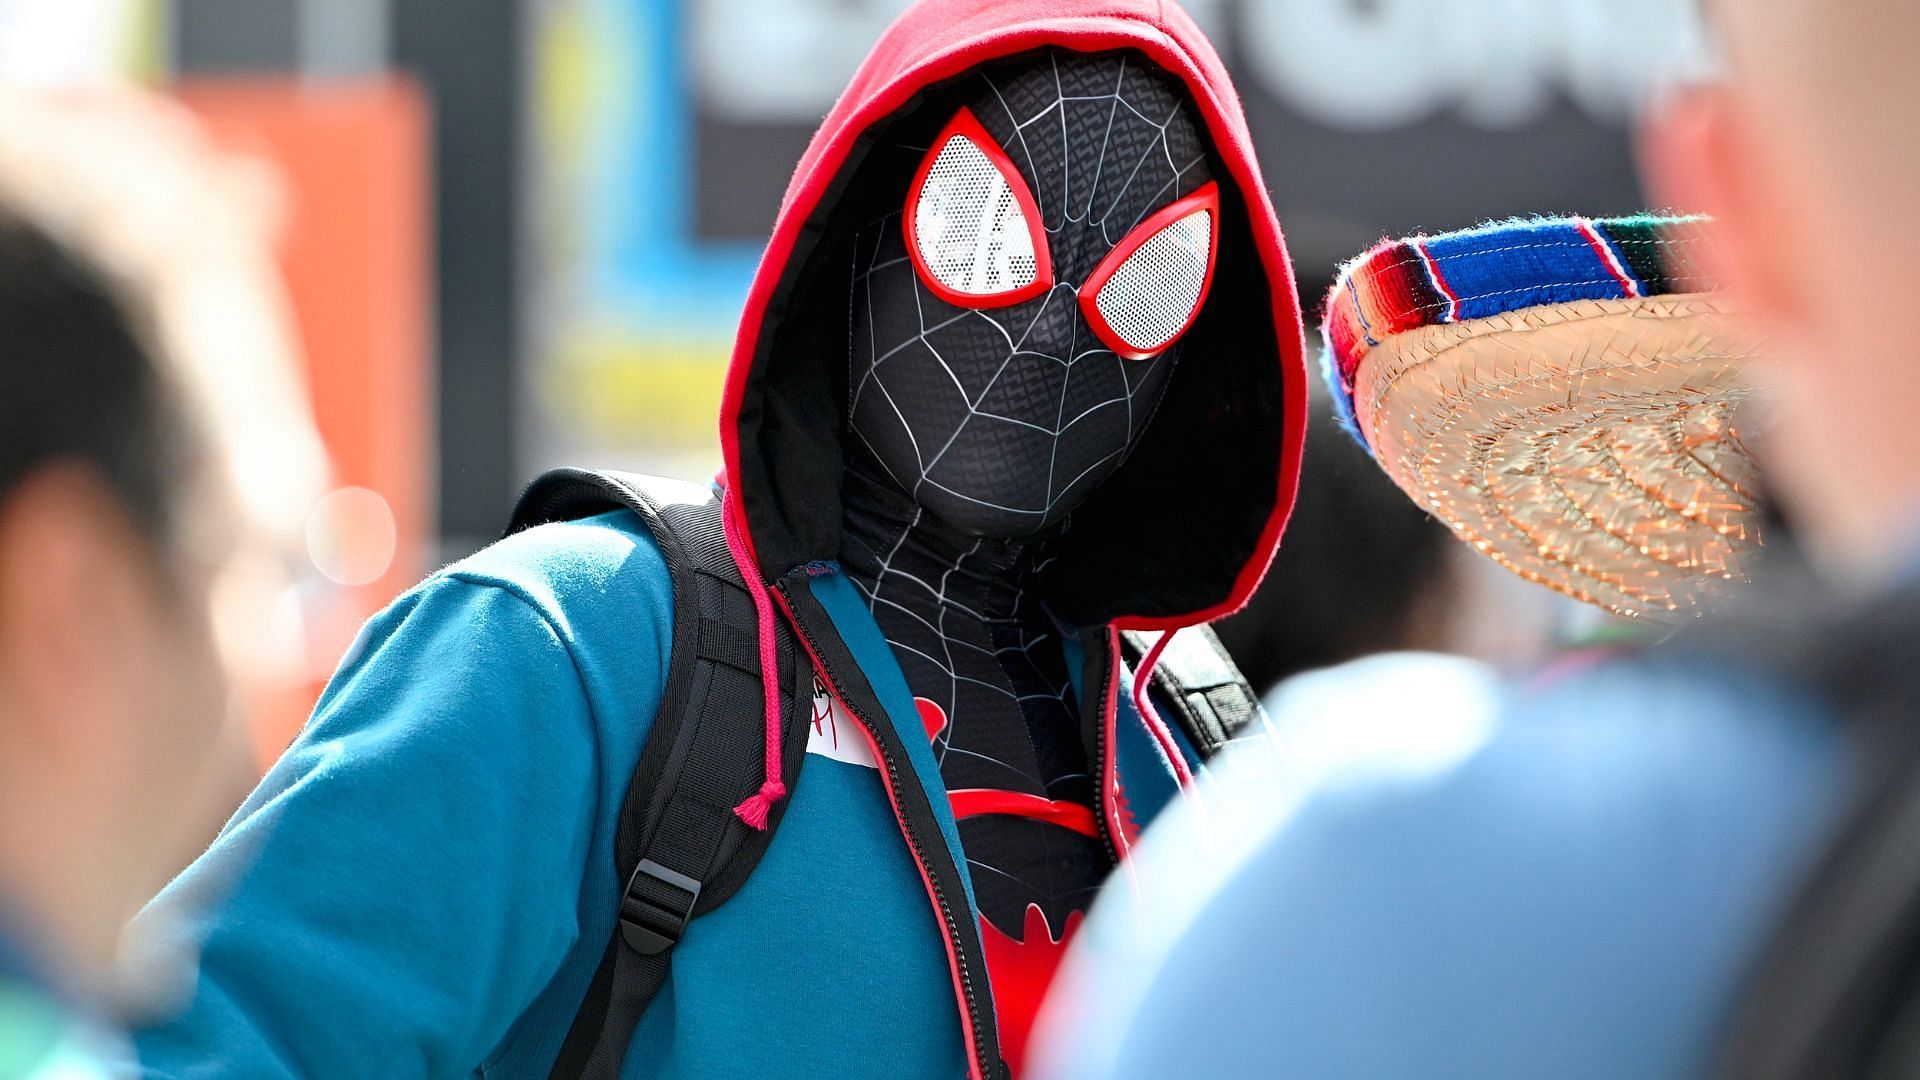 Miles Morales from Spider-Verse will never be able to appear in a live-action format (Image via IMDb)